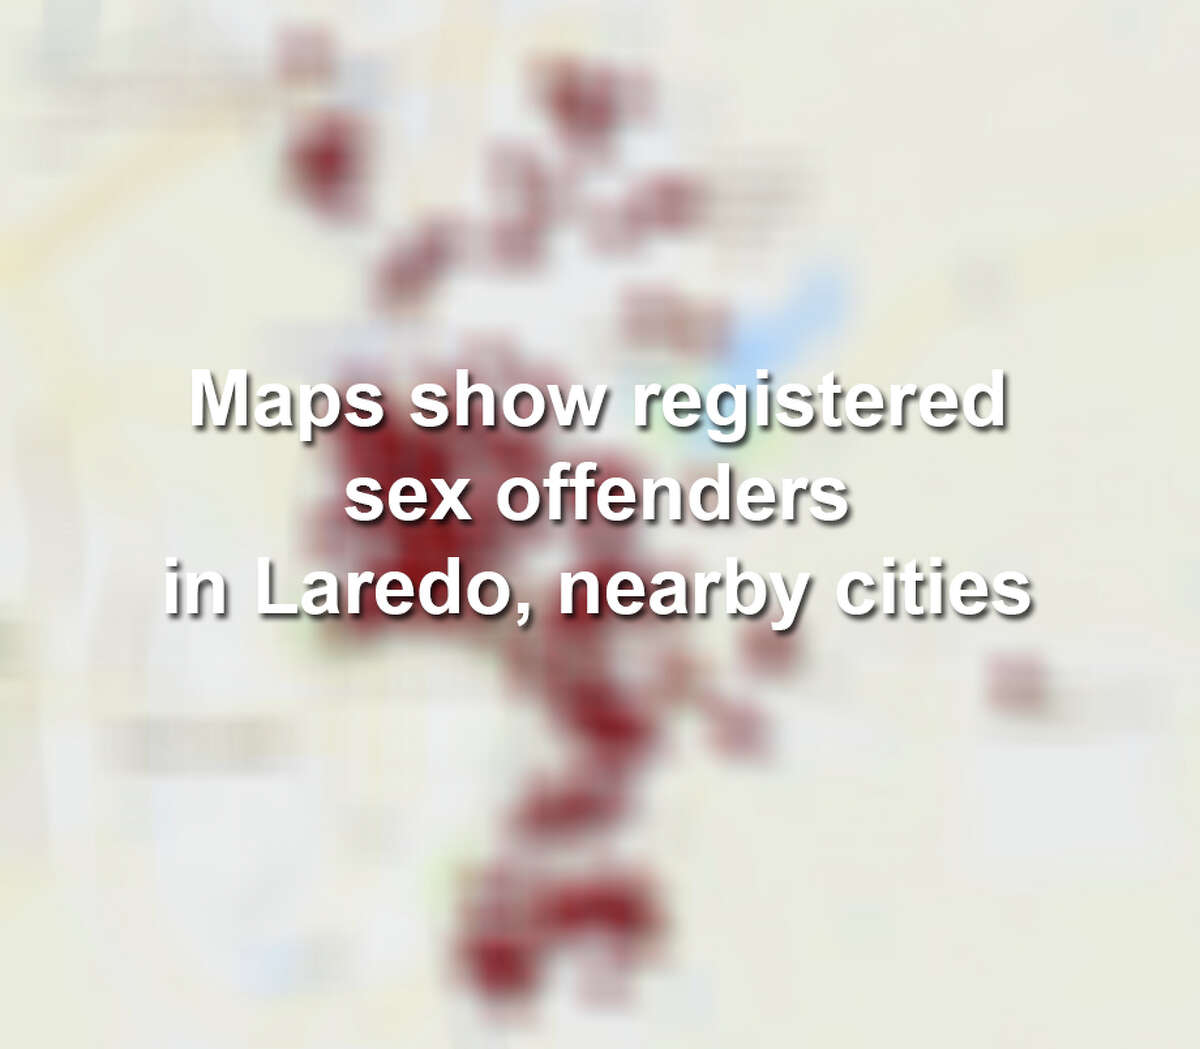 Here are the number of registered sex offenders in Laredo and nearby cities as of Jan. 2018 according to the Texas Department of Public Safety.